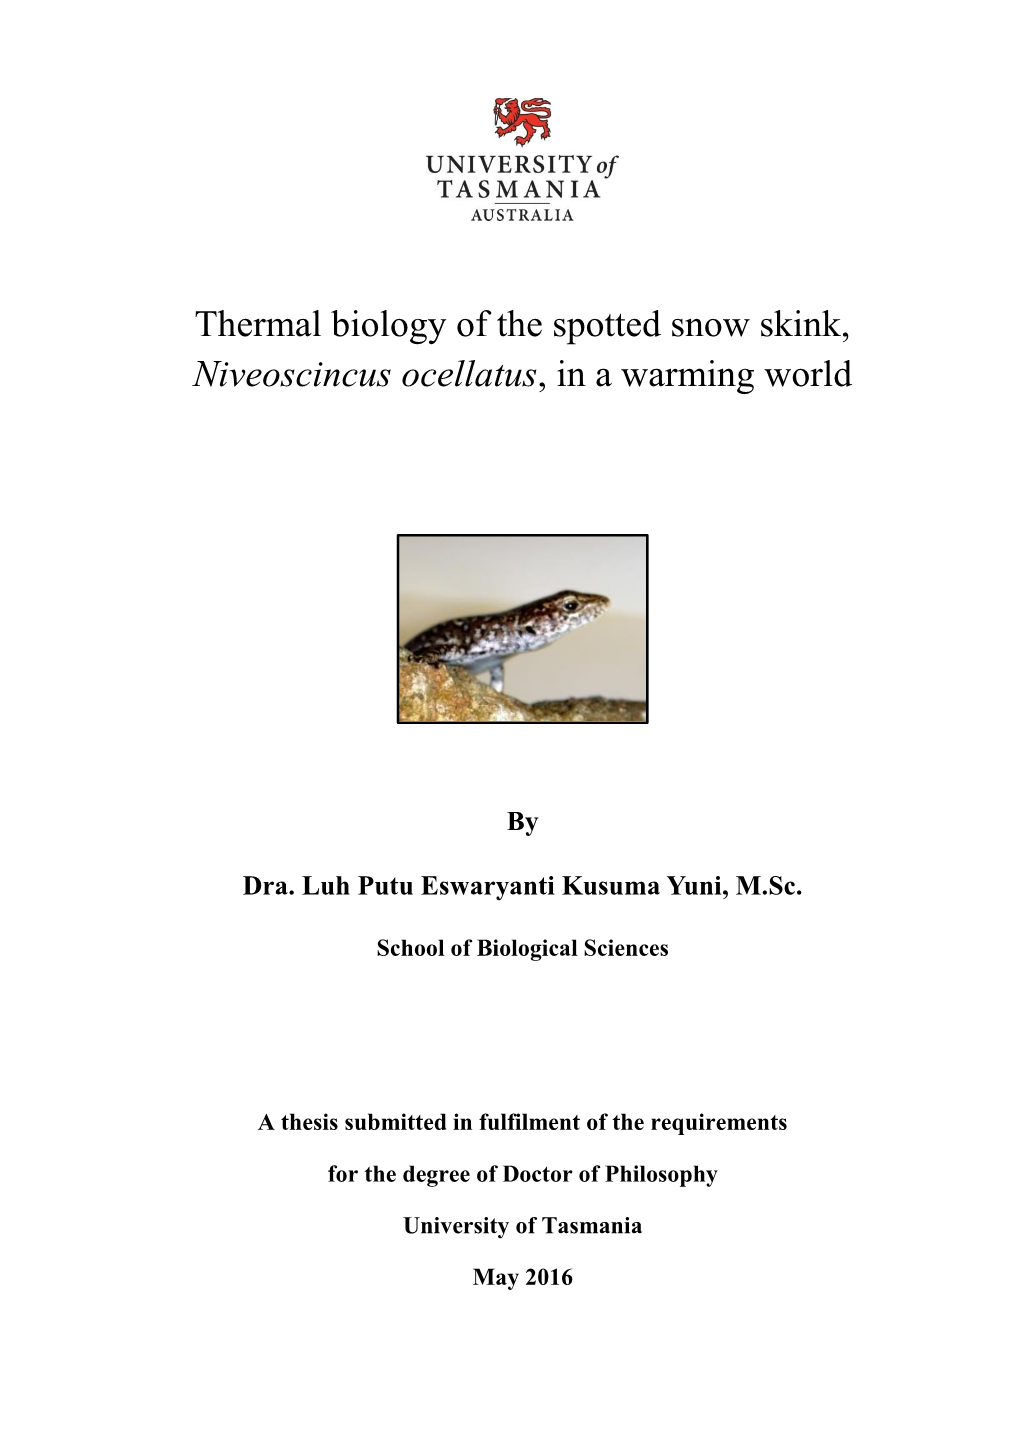 Thermal Biology of the Spotted Snow Skink, Niveoscincus Ocellatus, in a Warming World